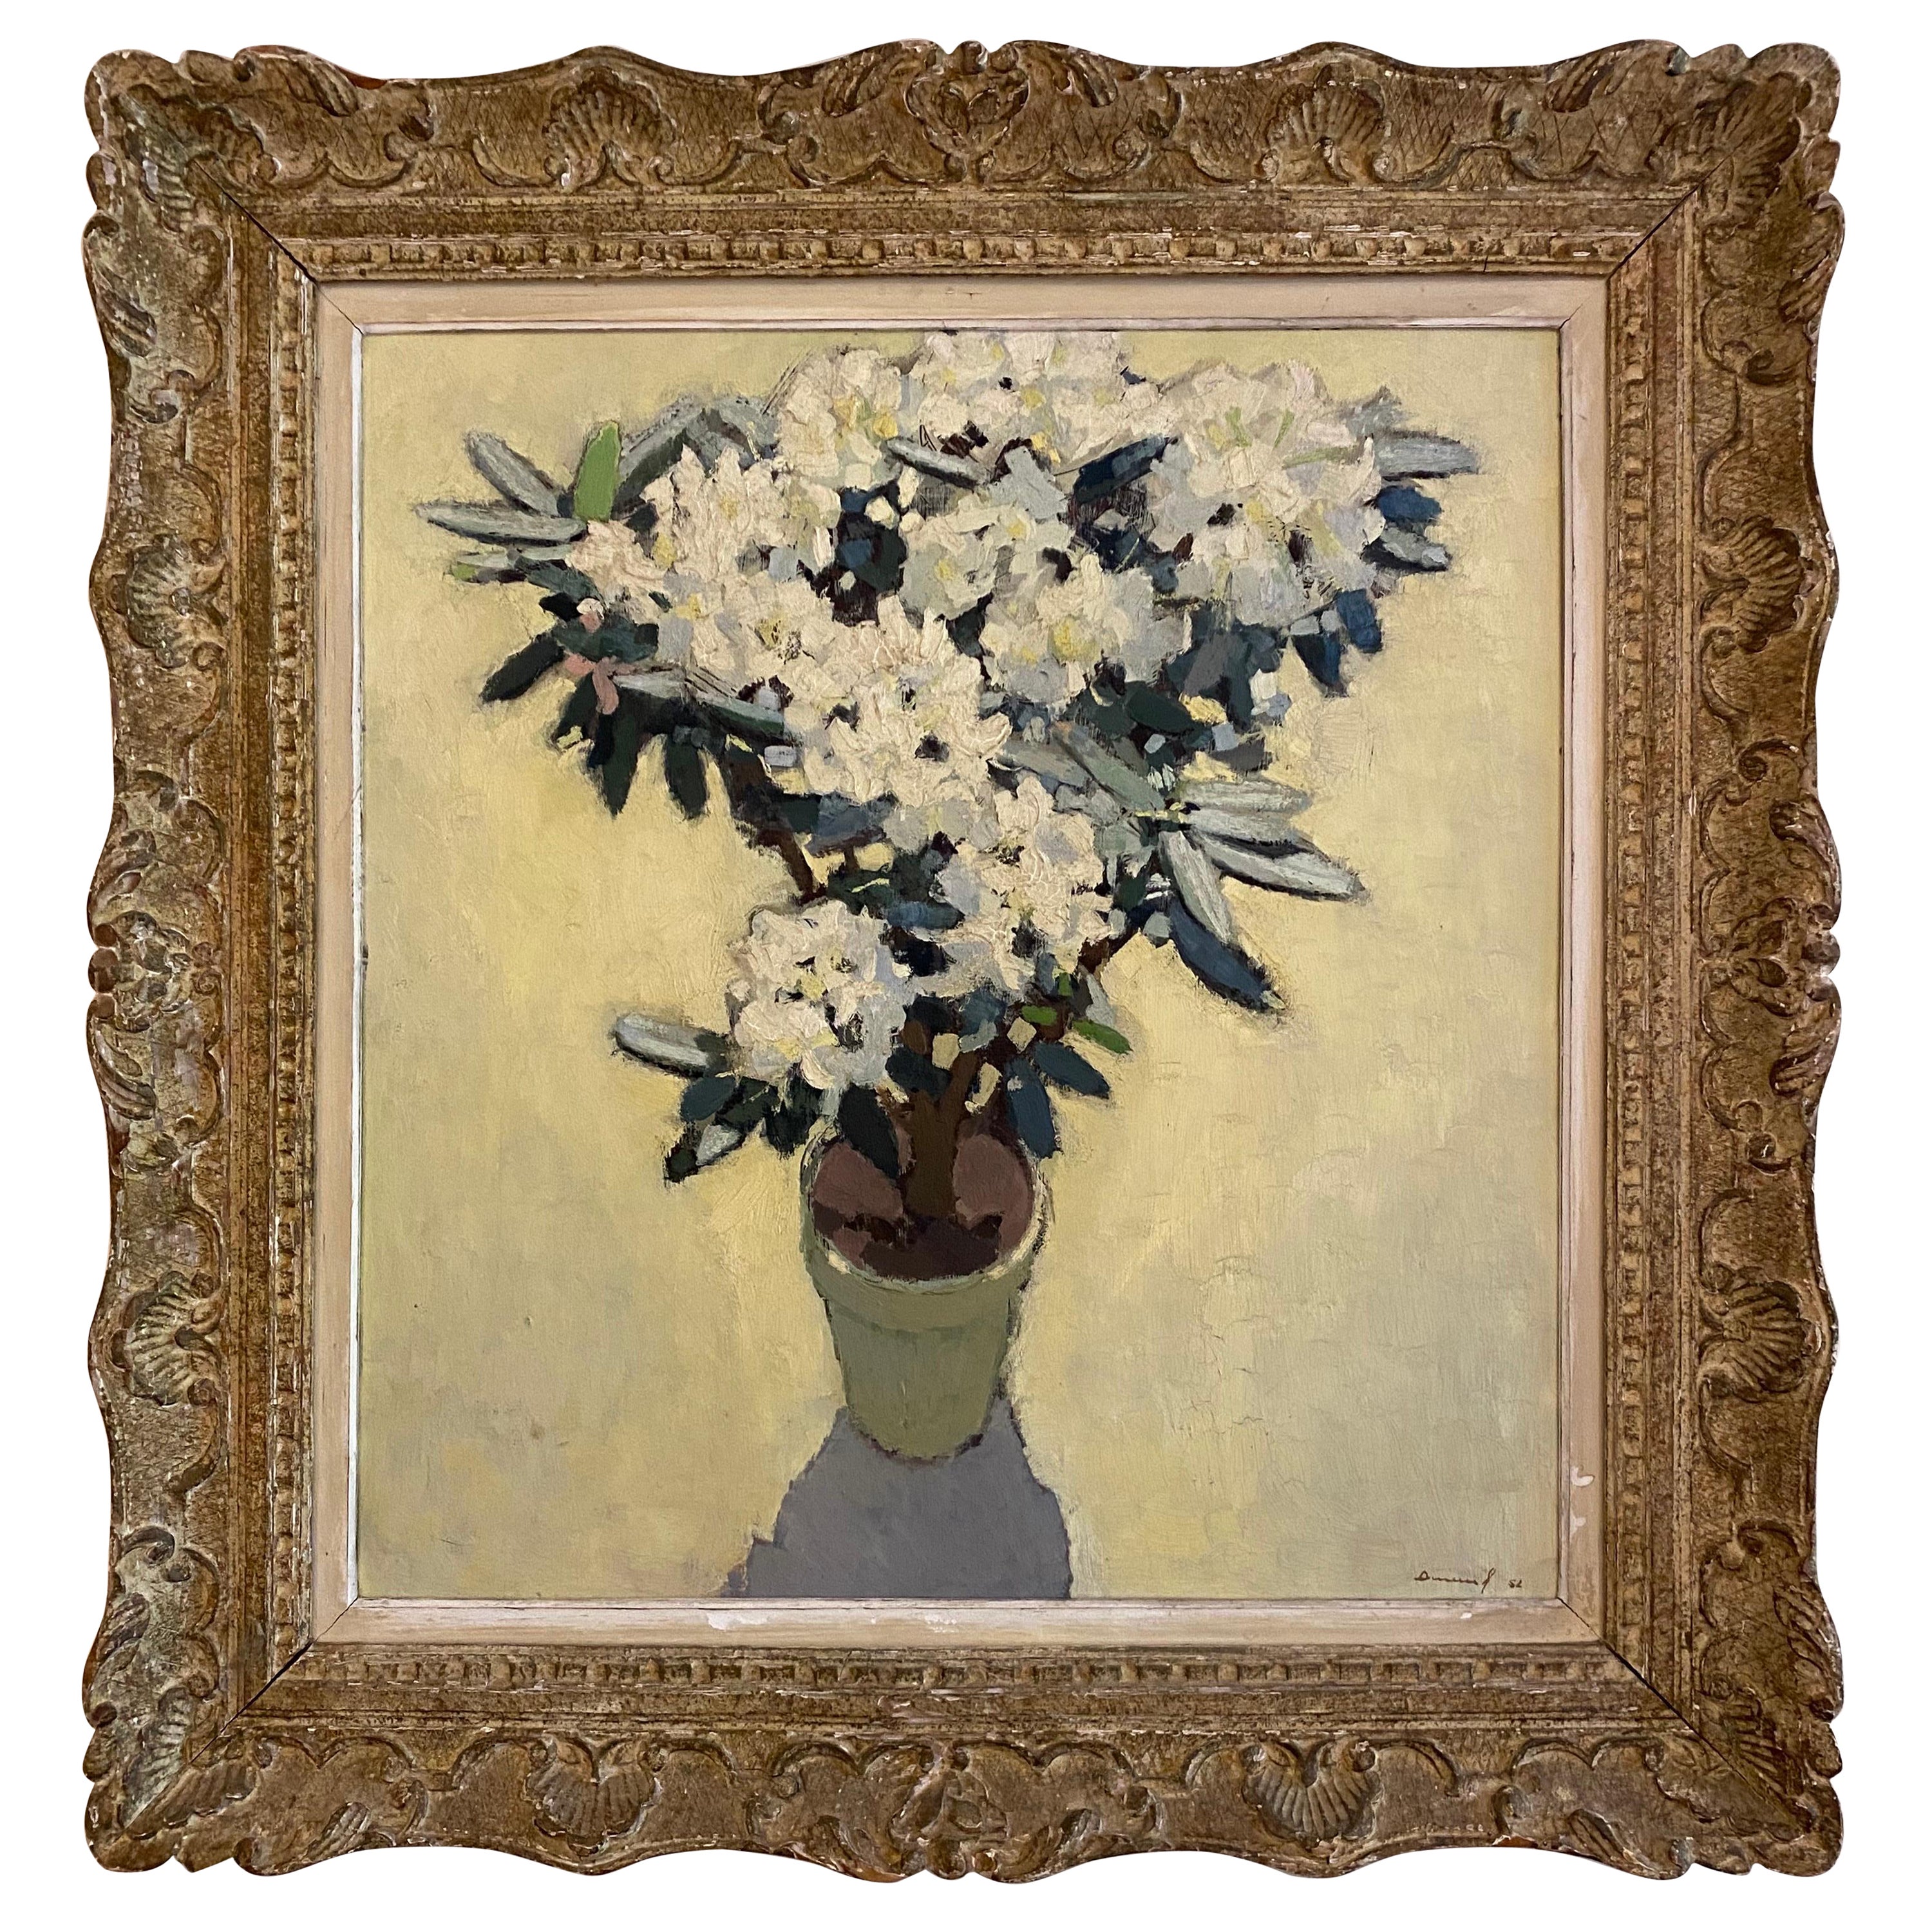 Michel Dureuil, French, Le Rhododendron, Oil on Canvas, 1952